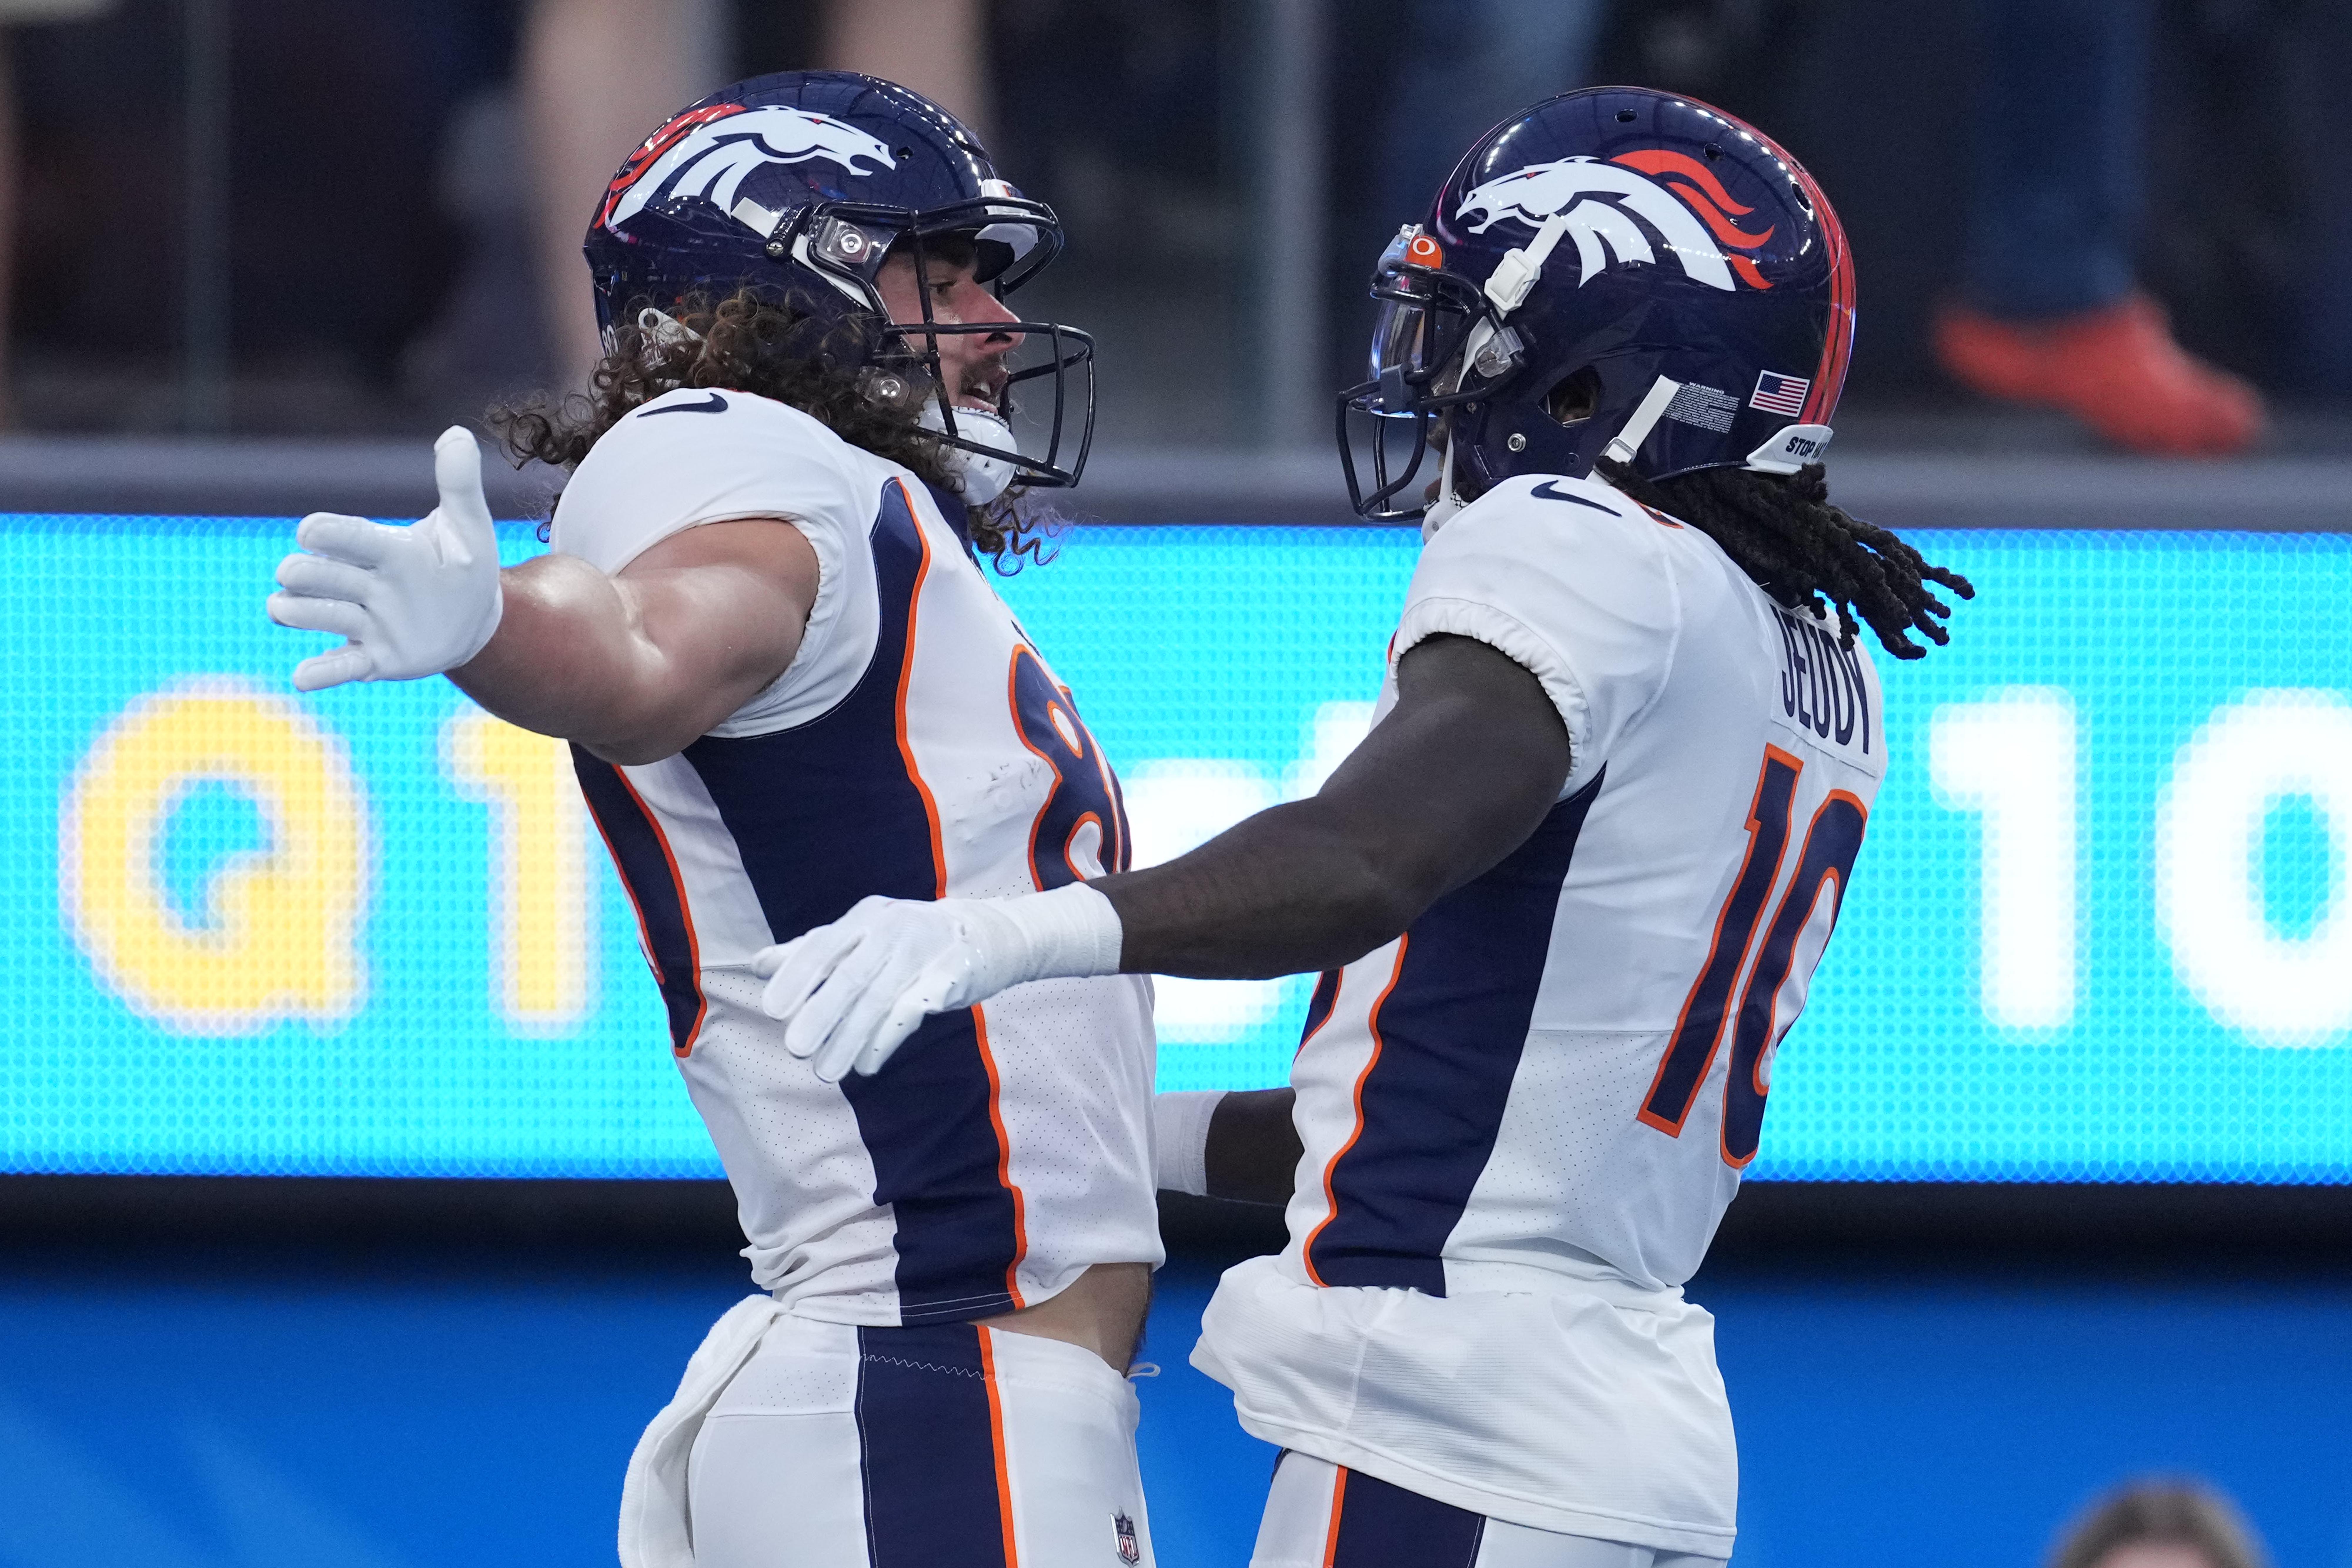 Denver Broncos tight end Greg Dulcich (80) and wide receiver Jerry Jeudy (10) celebrate after a touchdown against the Los Angeles Chargers in the first half at SoFi Stadium.